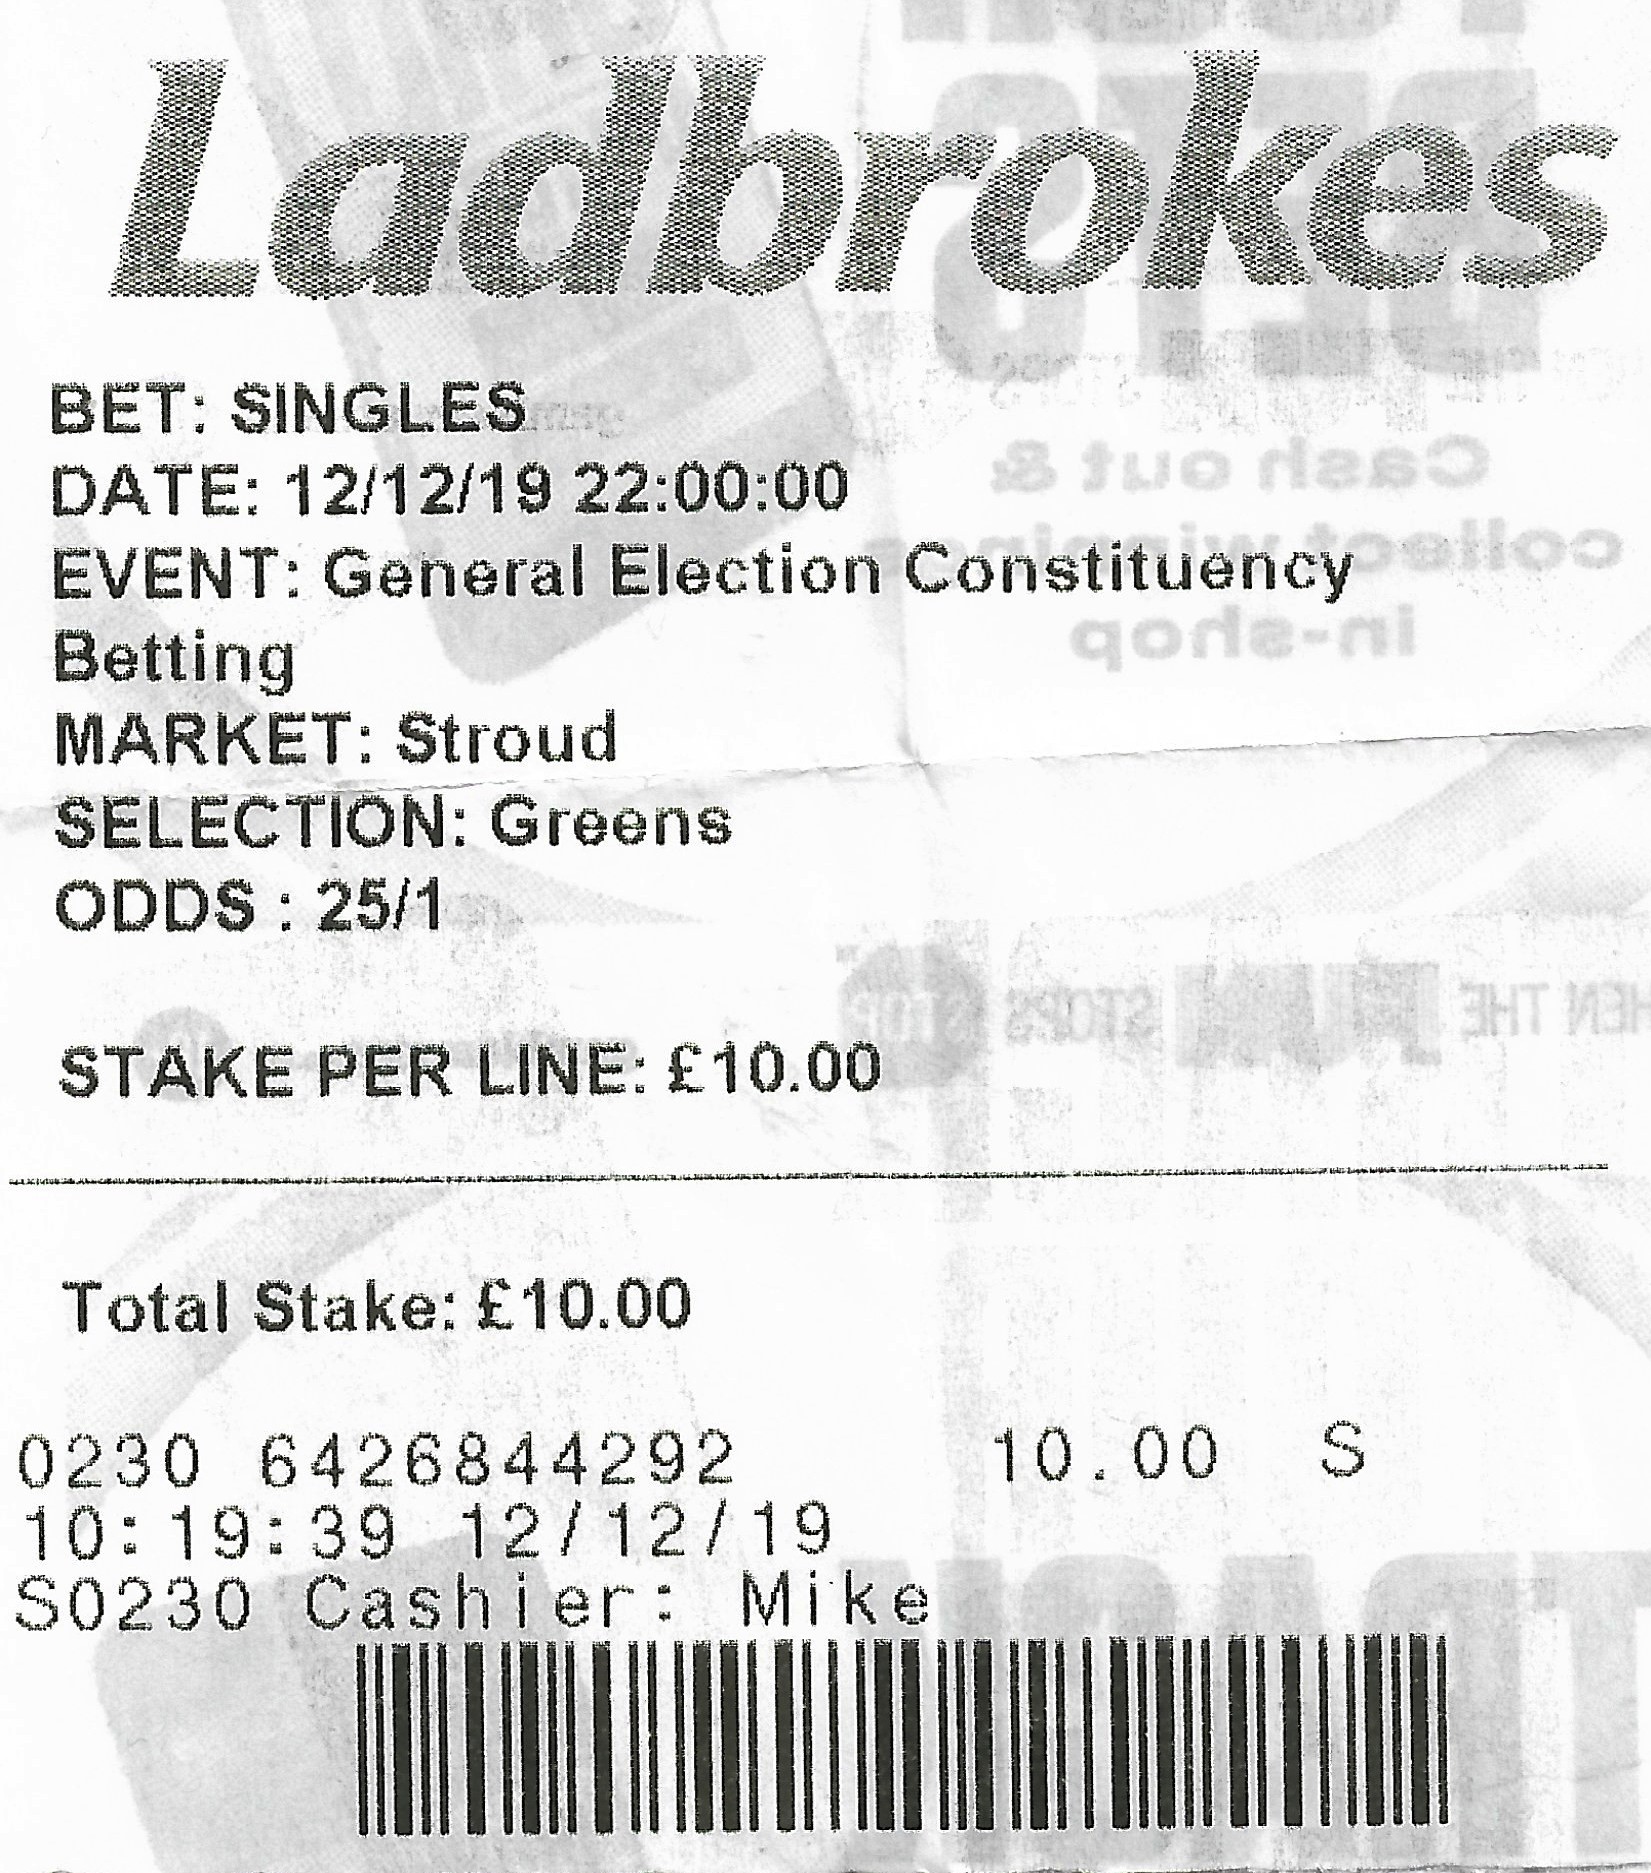 Labrokes bet on Greens